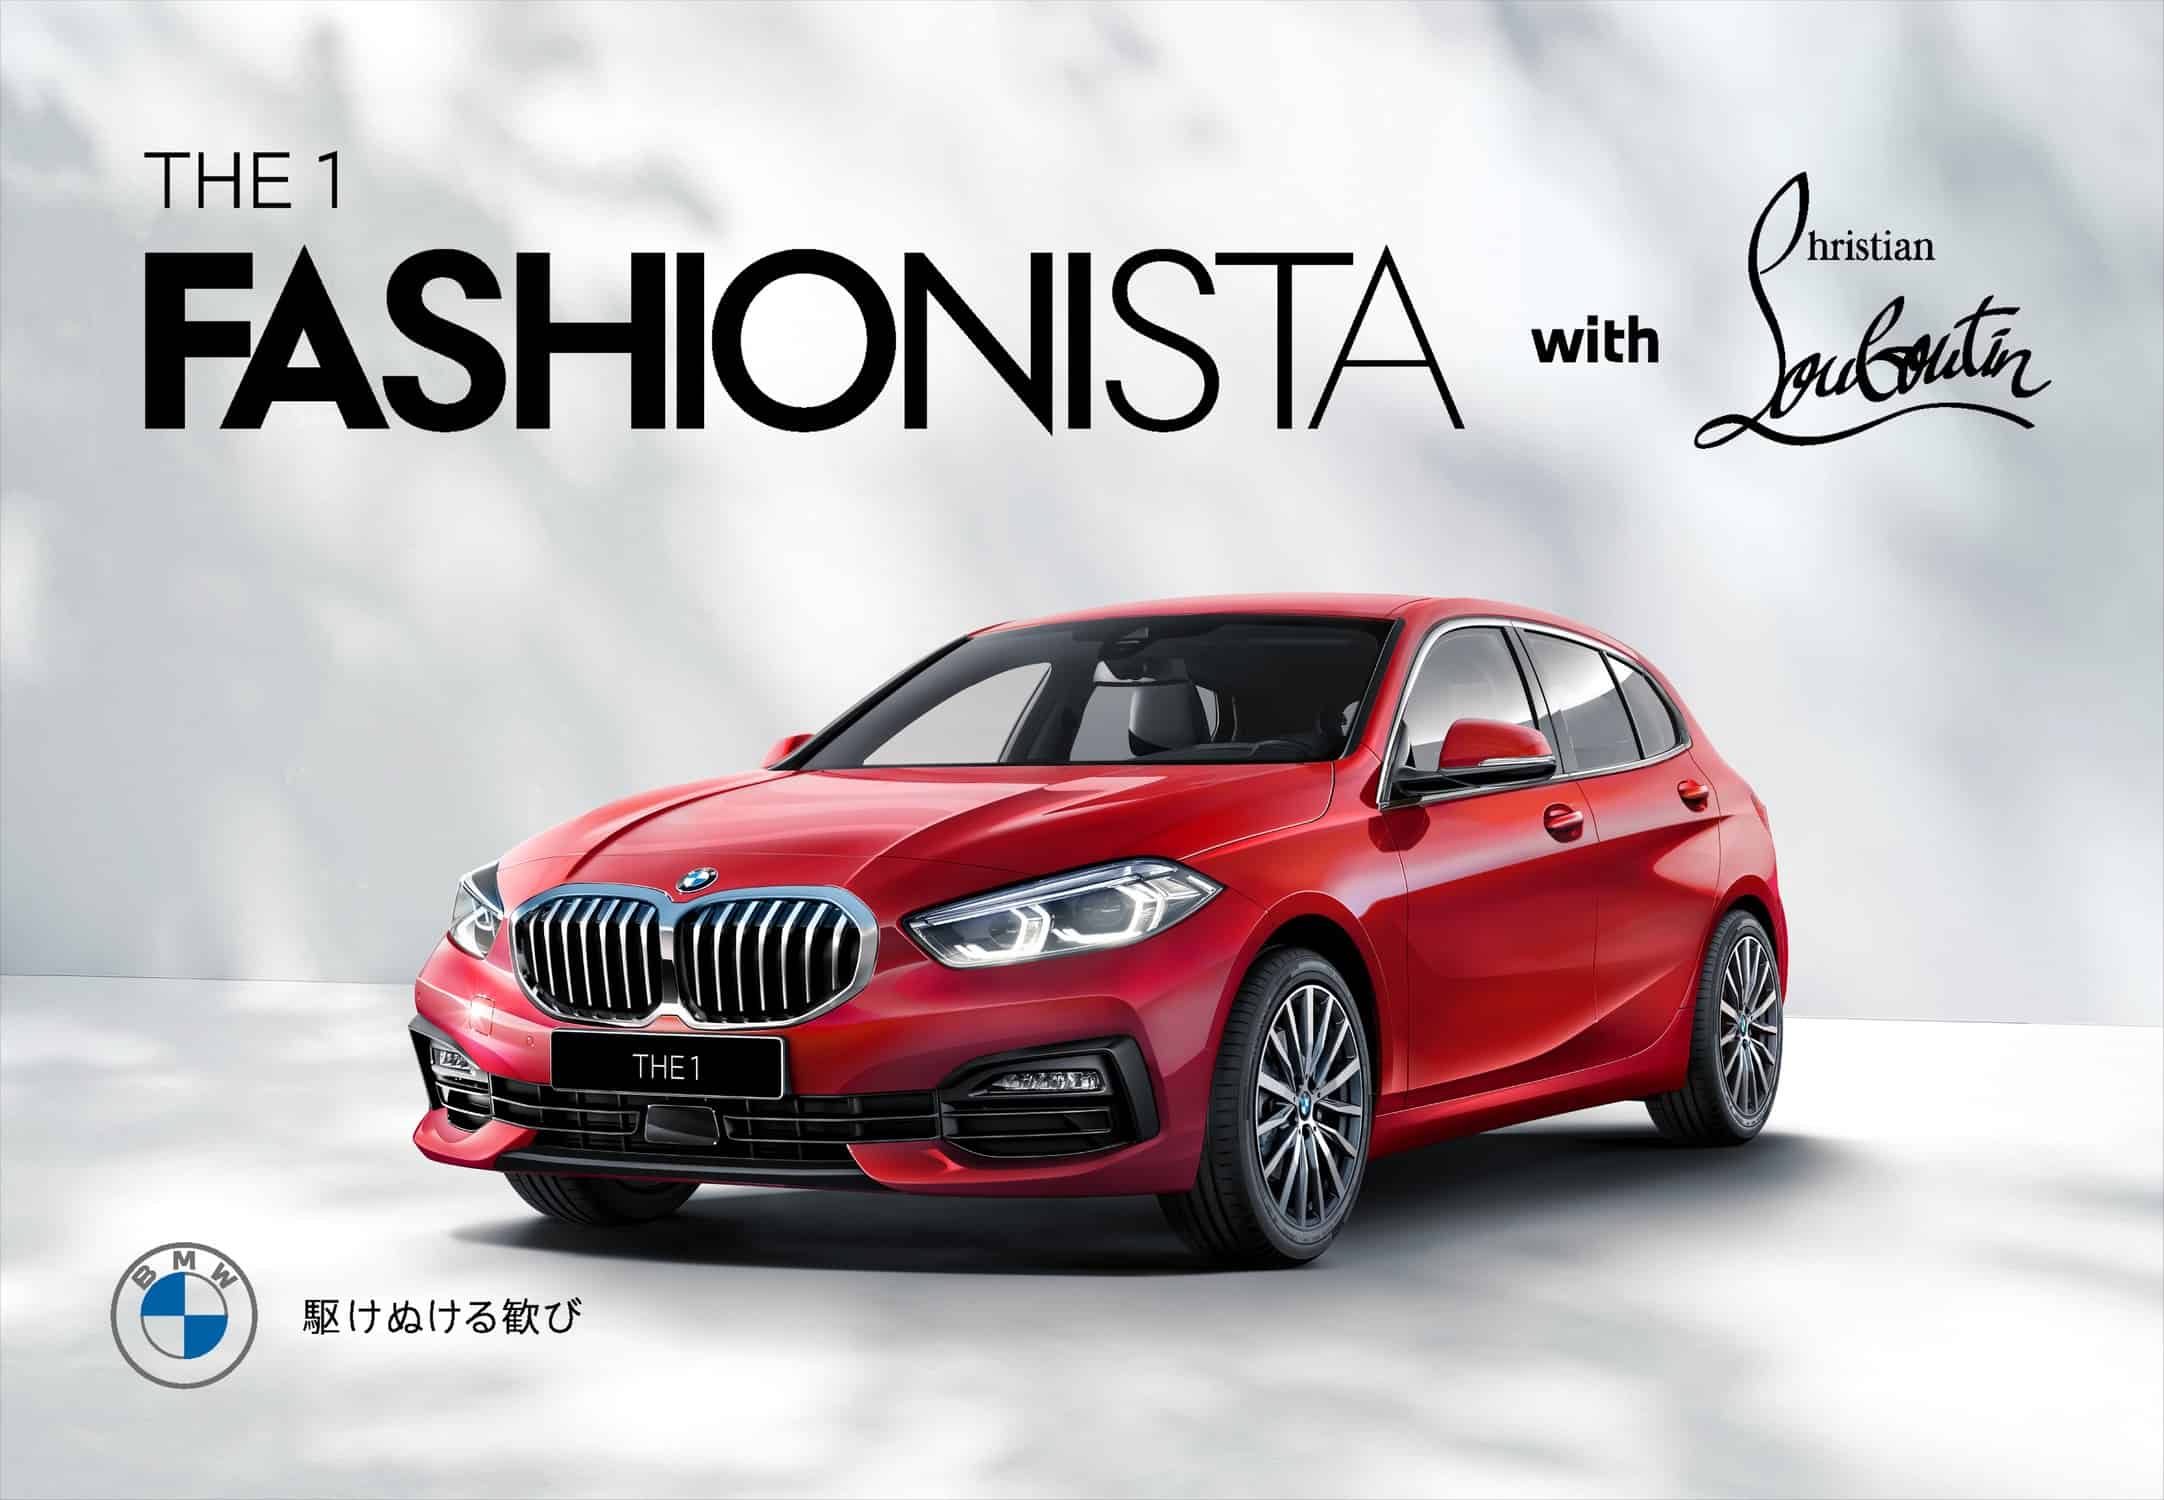 BMW 1 Series Fashionista Comes With A Christian Louboutin Bag